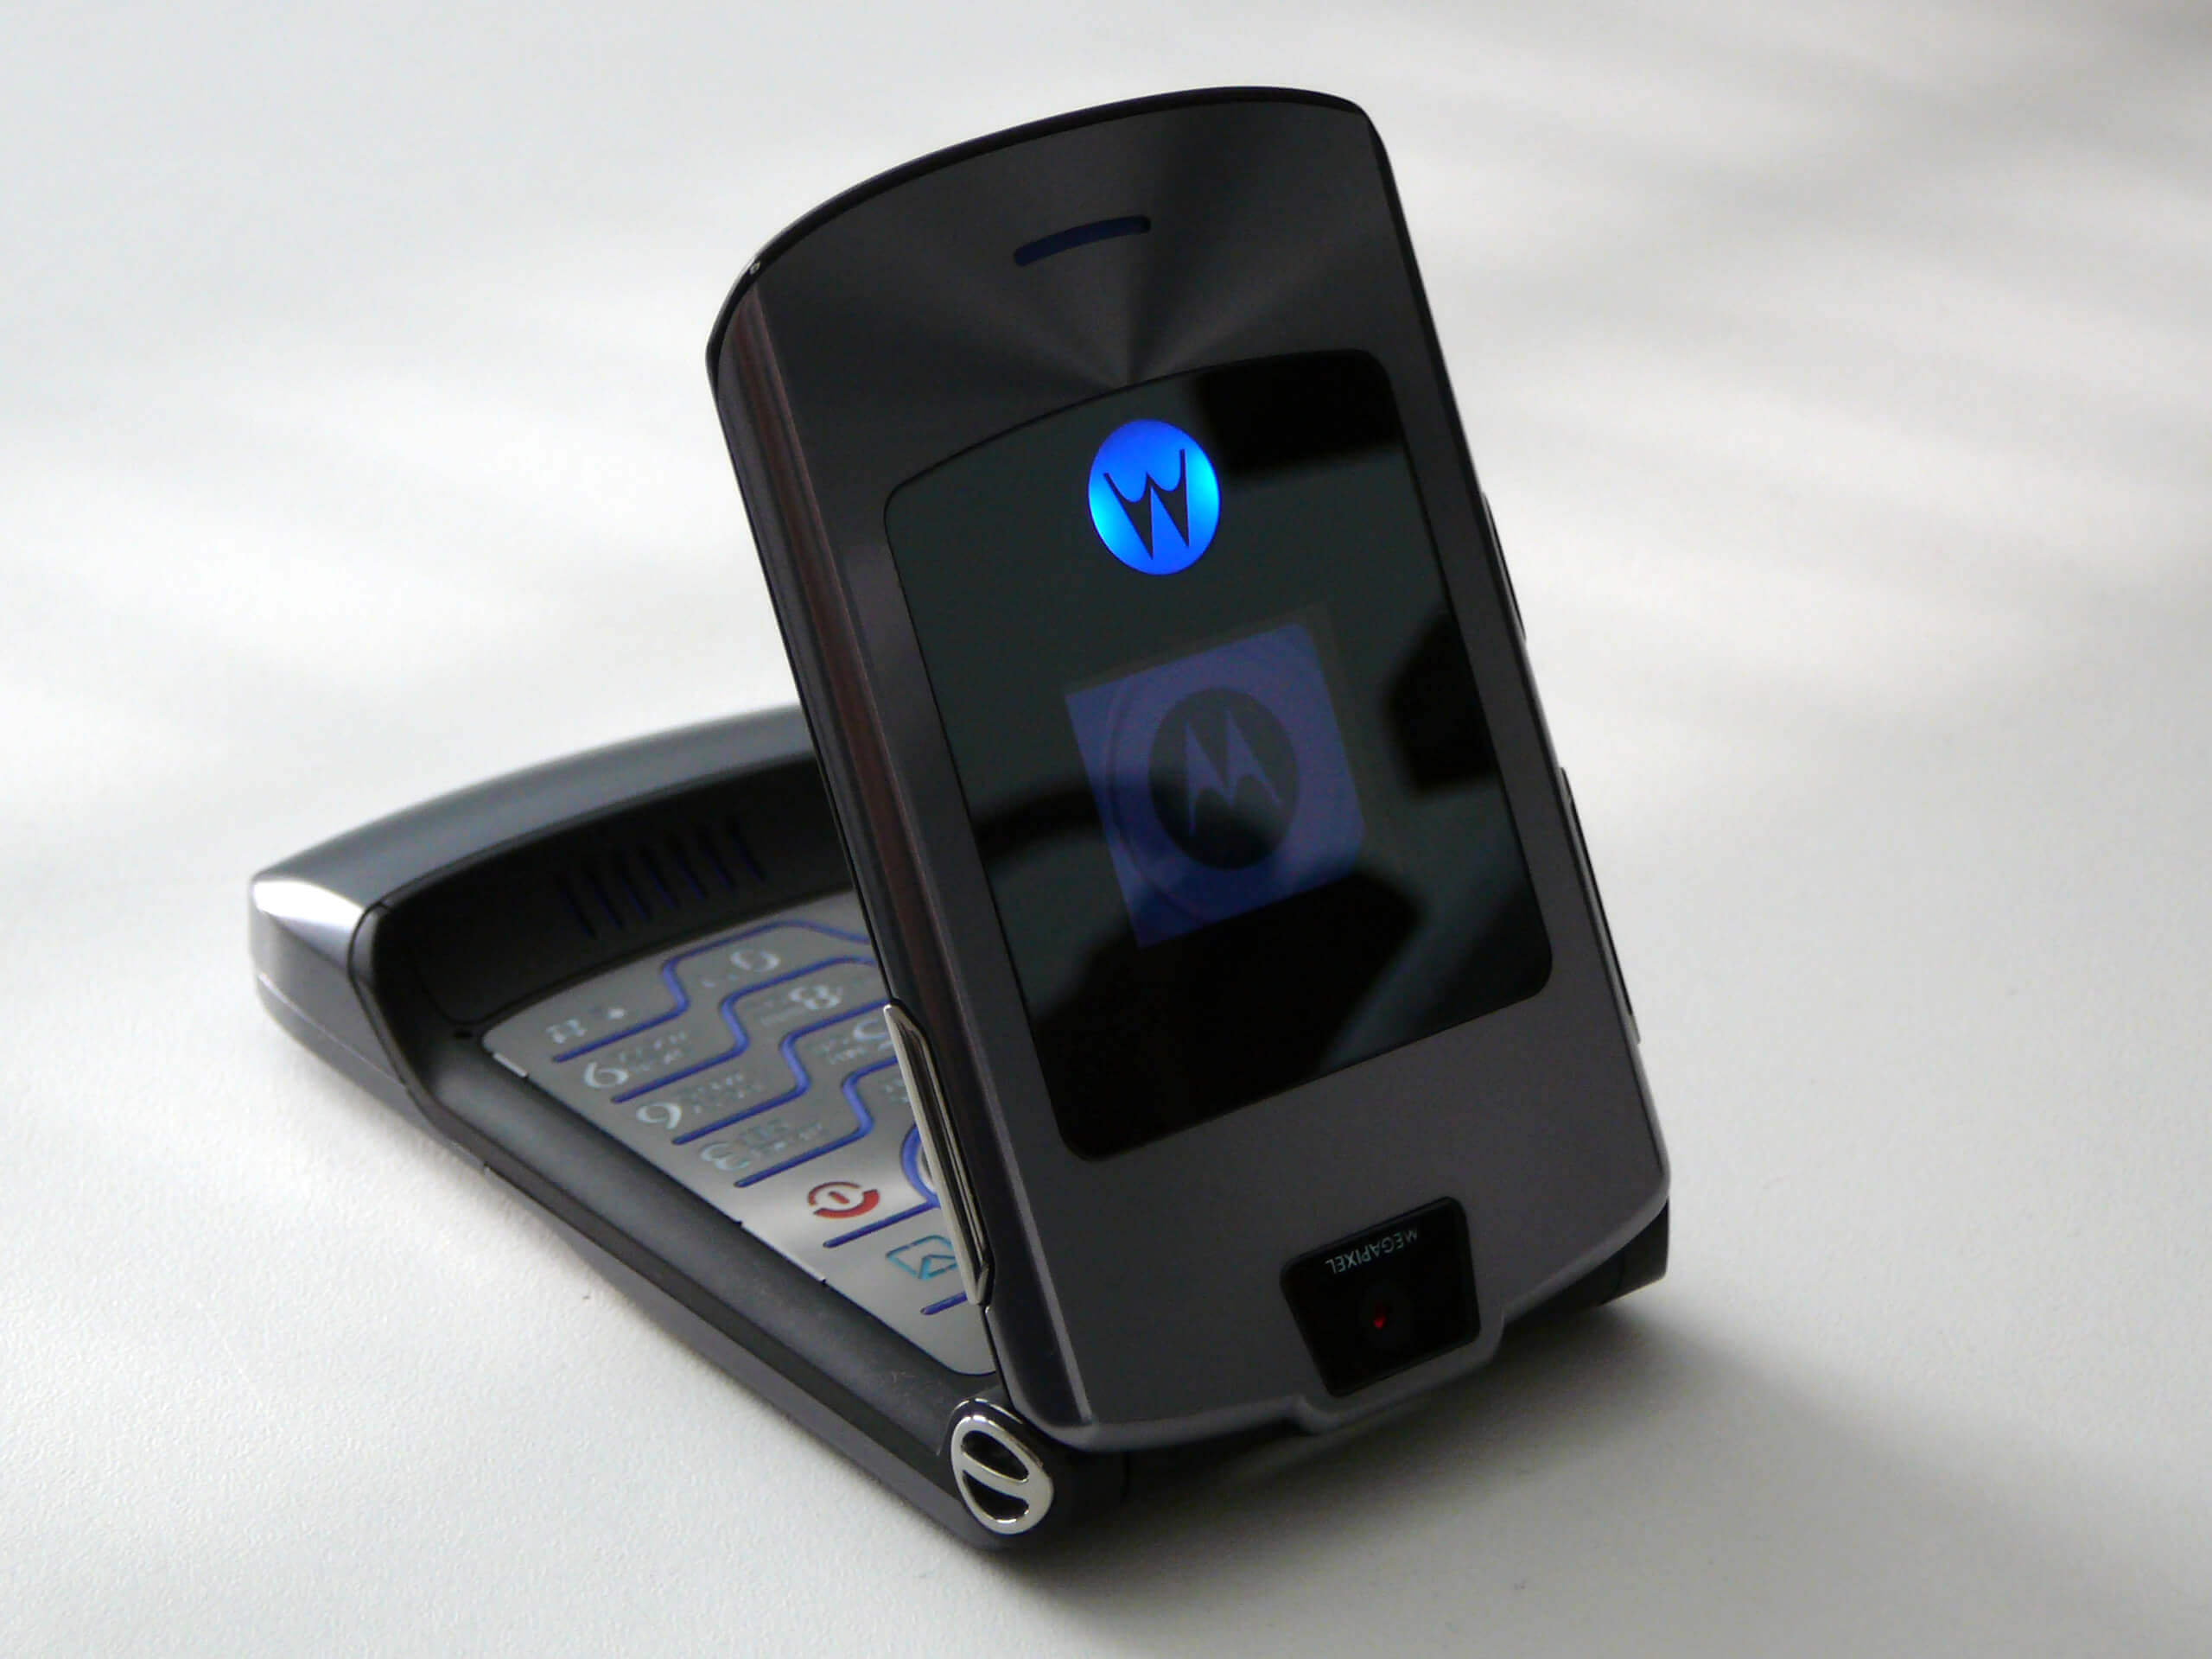 Flexible display RAZR flip-phones could be introduced with a $1,500 price tag